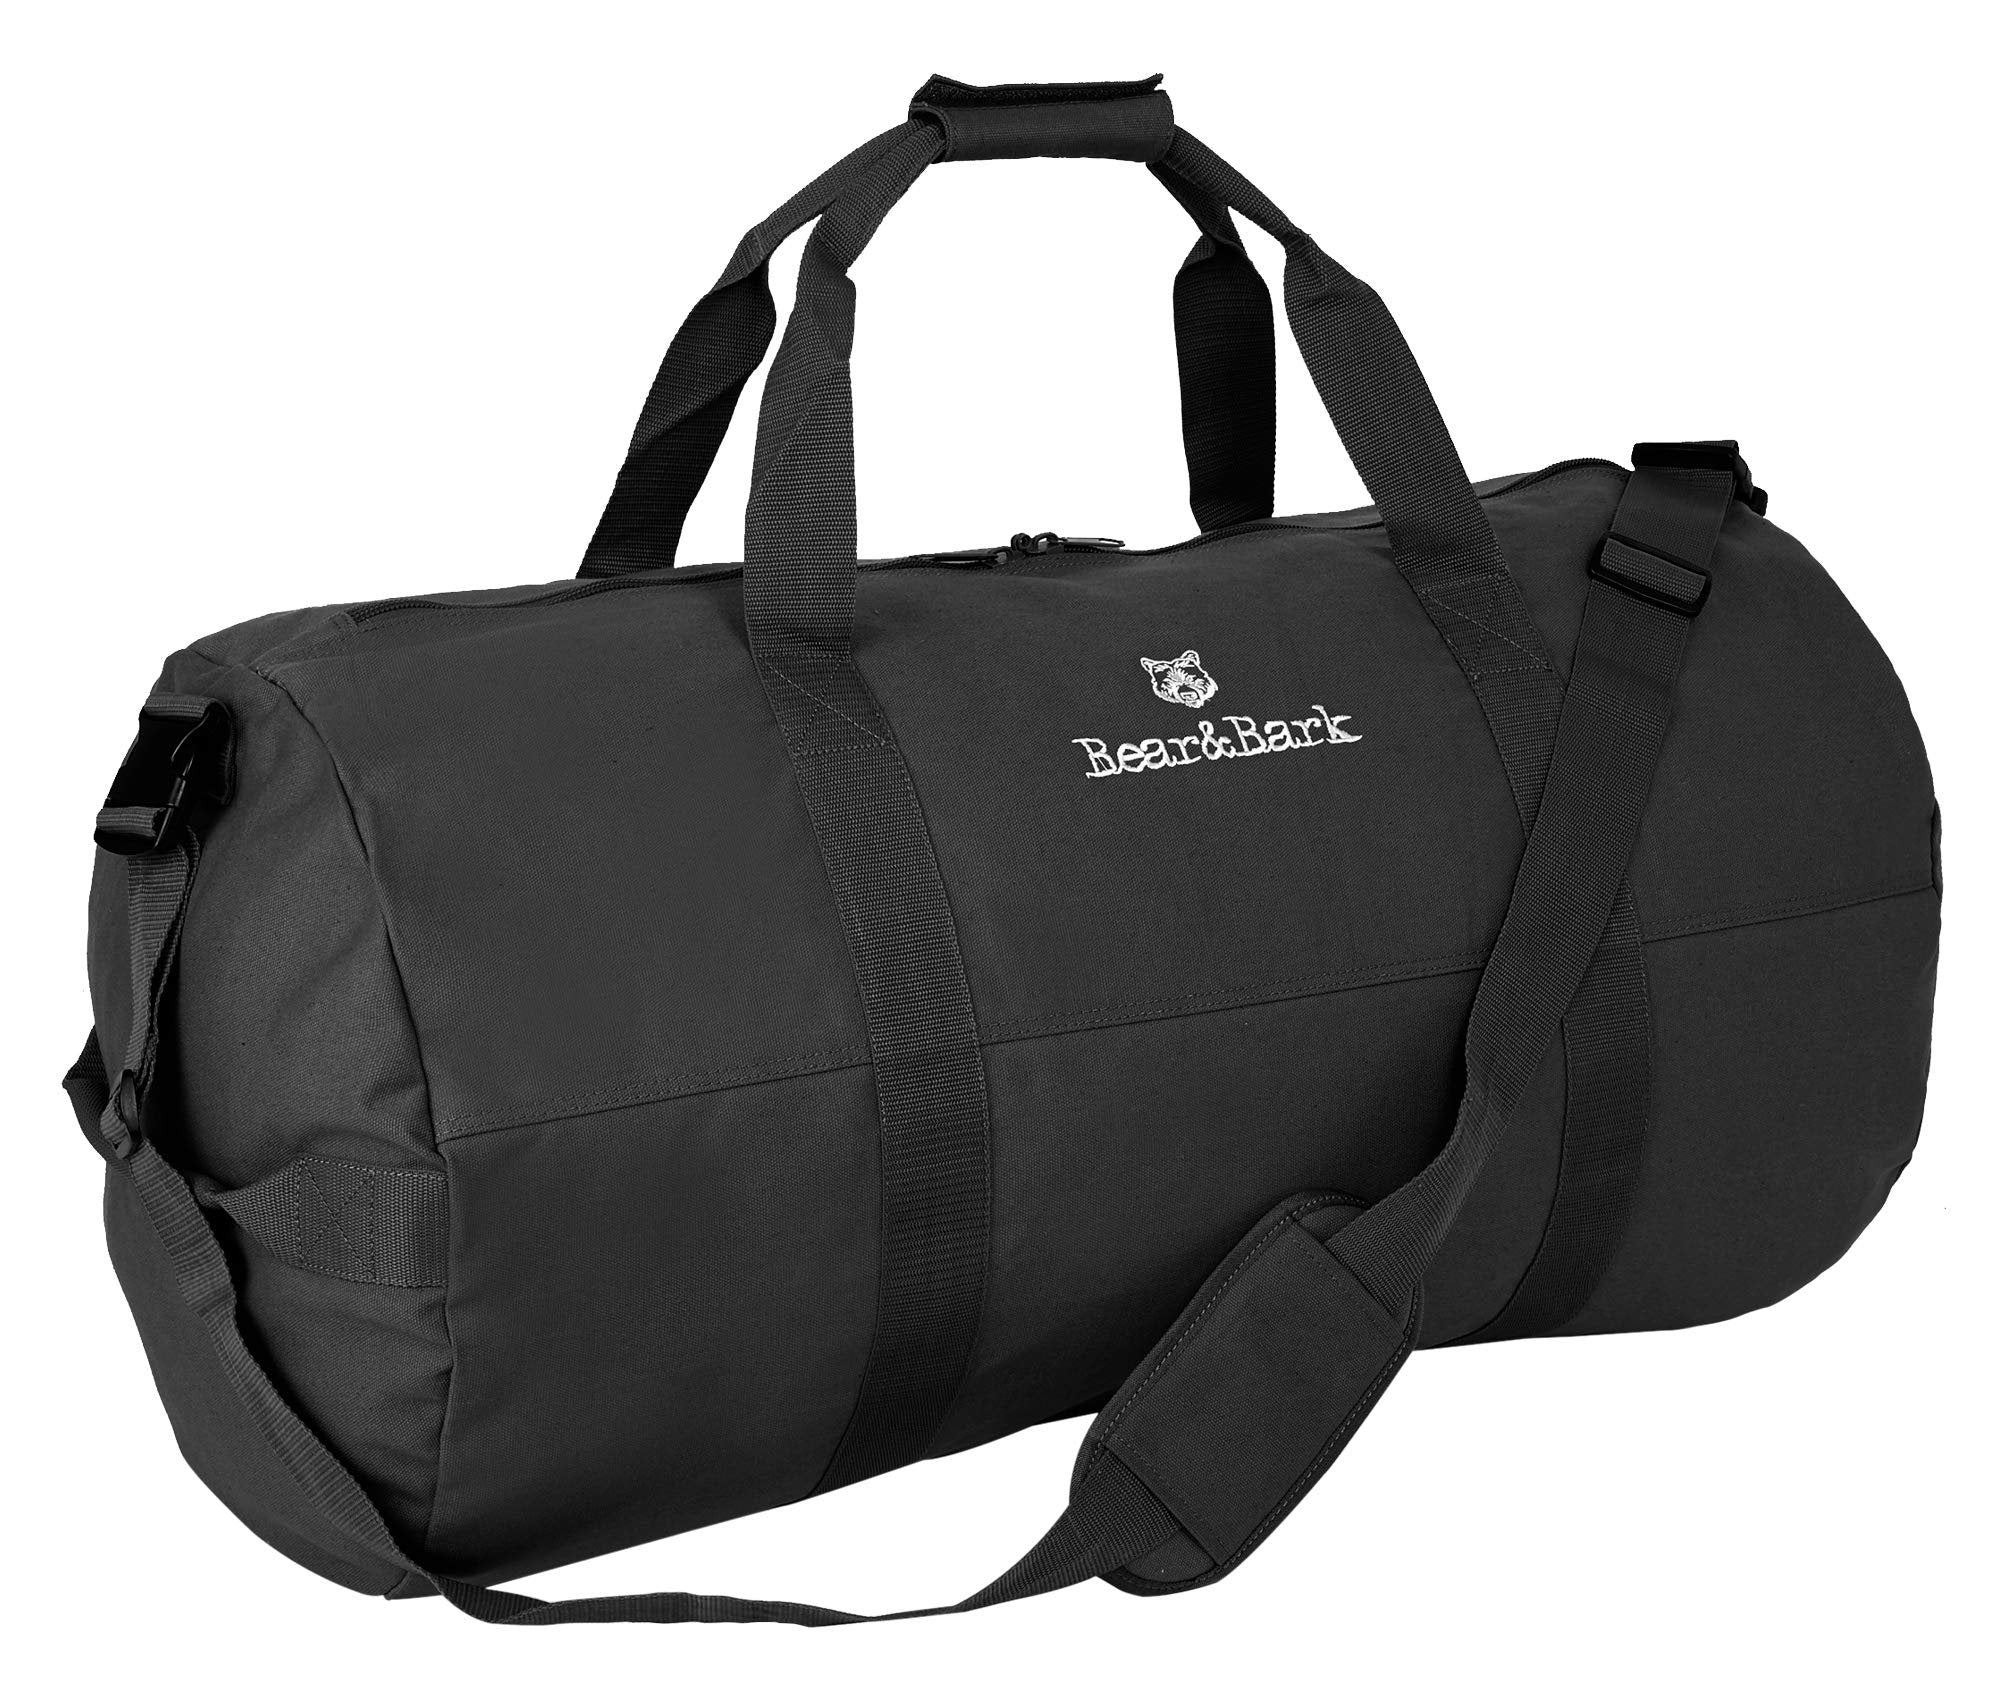 Black Canvas Duffle Bag 133.4L - Standard 32X18 Size - Military Style for Gym, Travel, and Storage